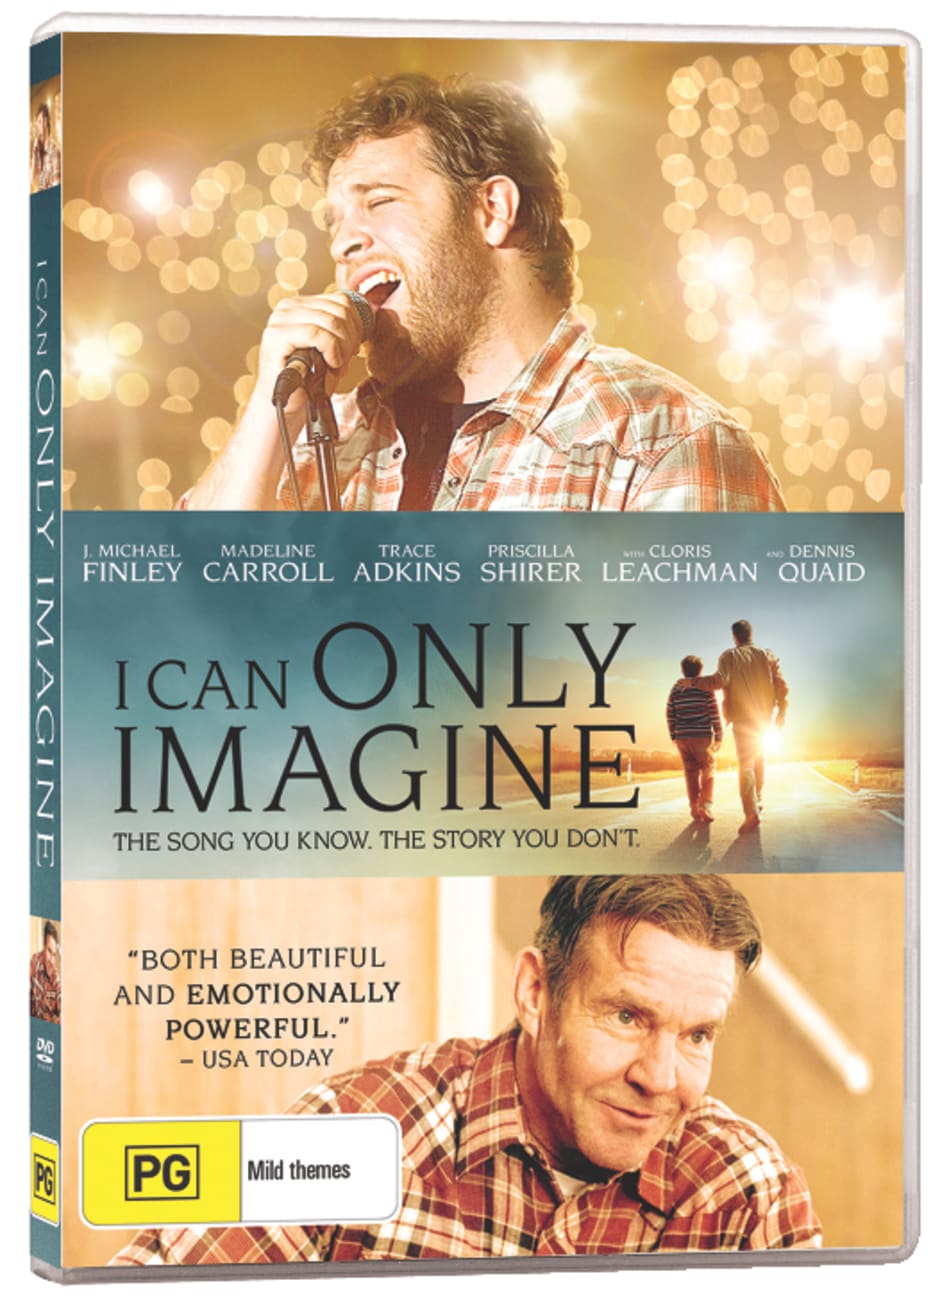 DVD I CAN ONLY IMAGINE MOVIE